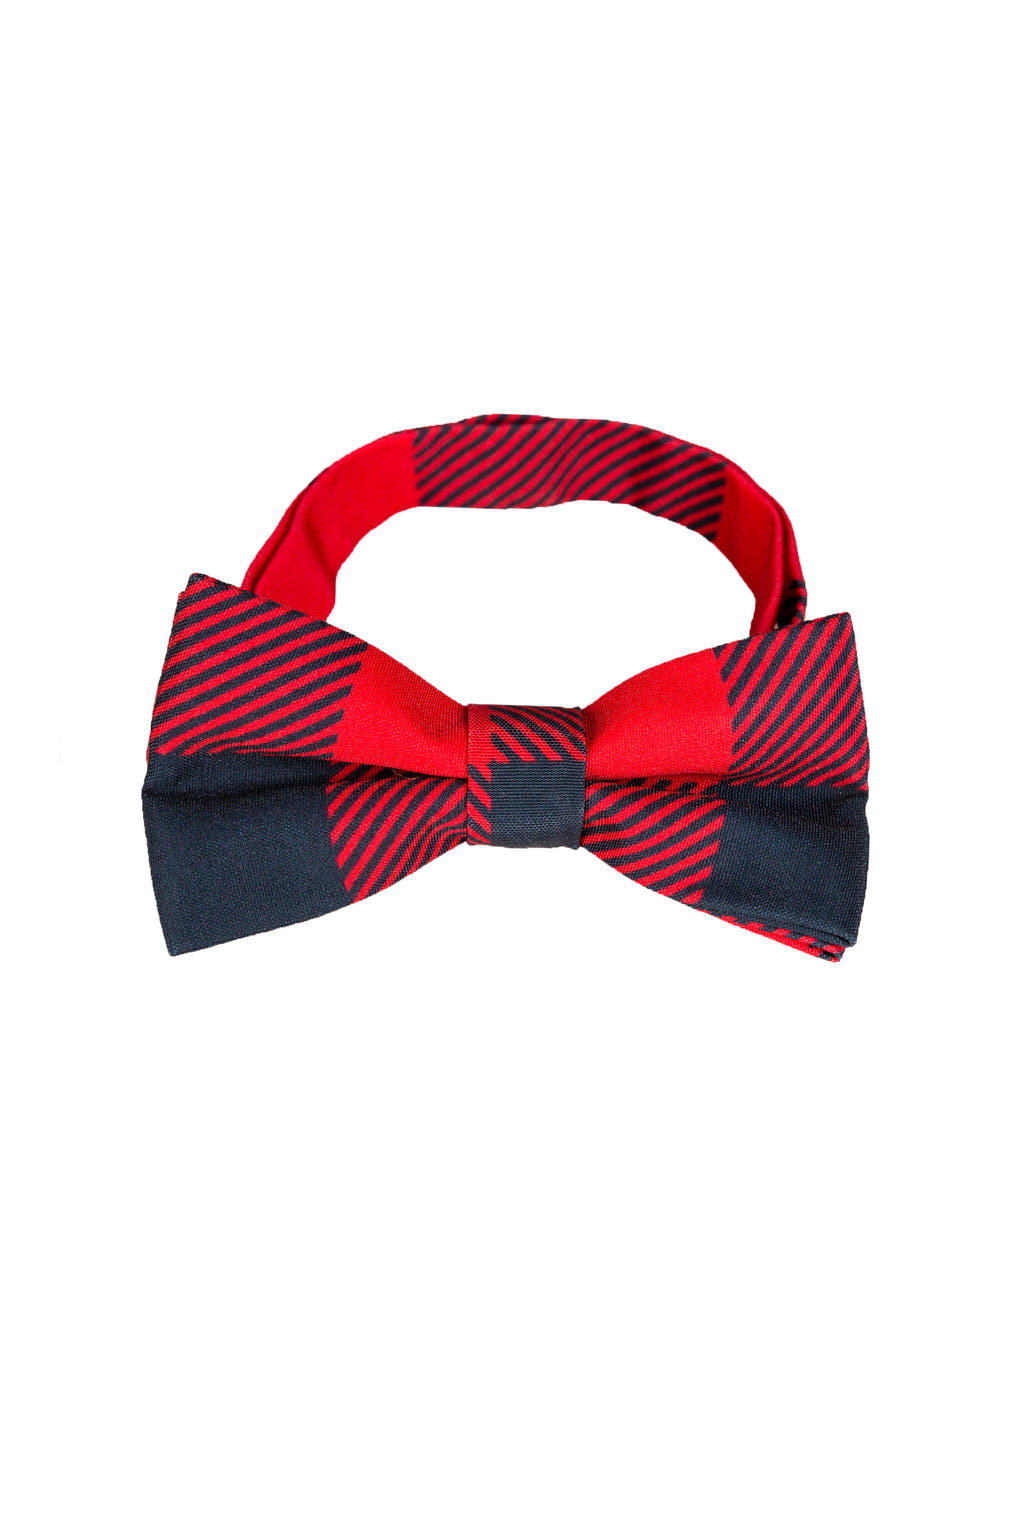 Red and Black Buffalo Check Bow Tie